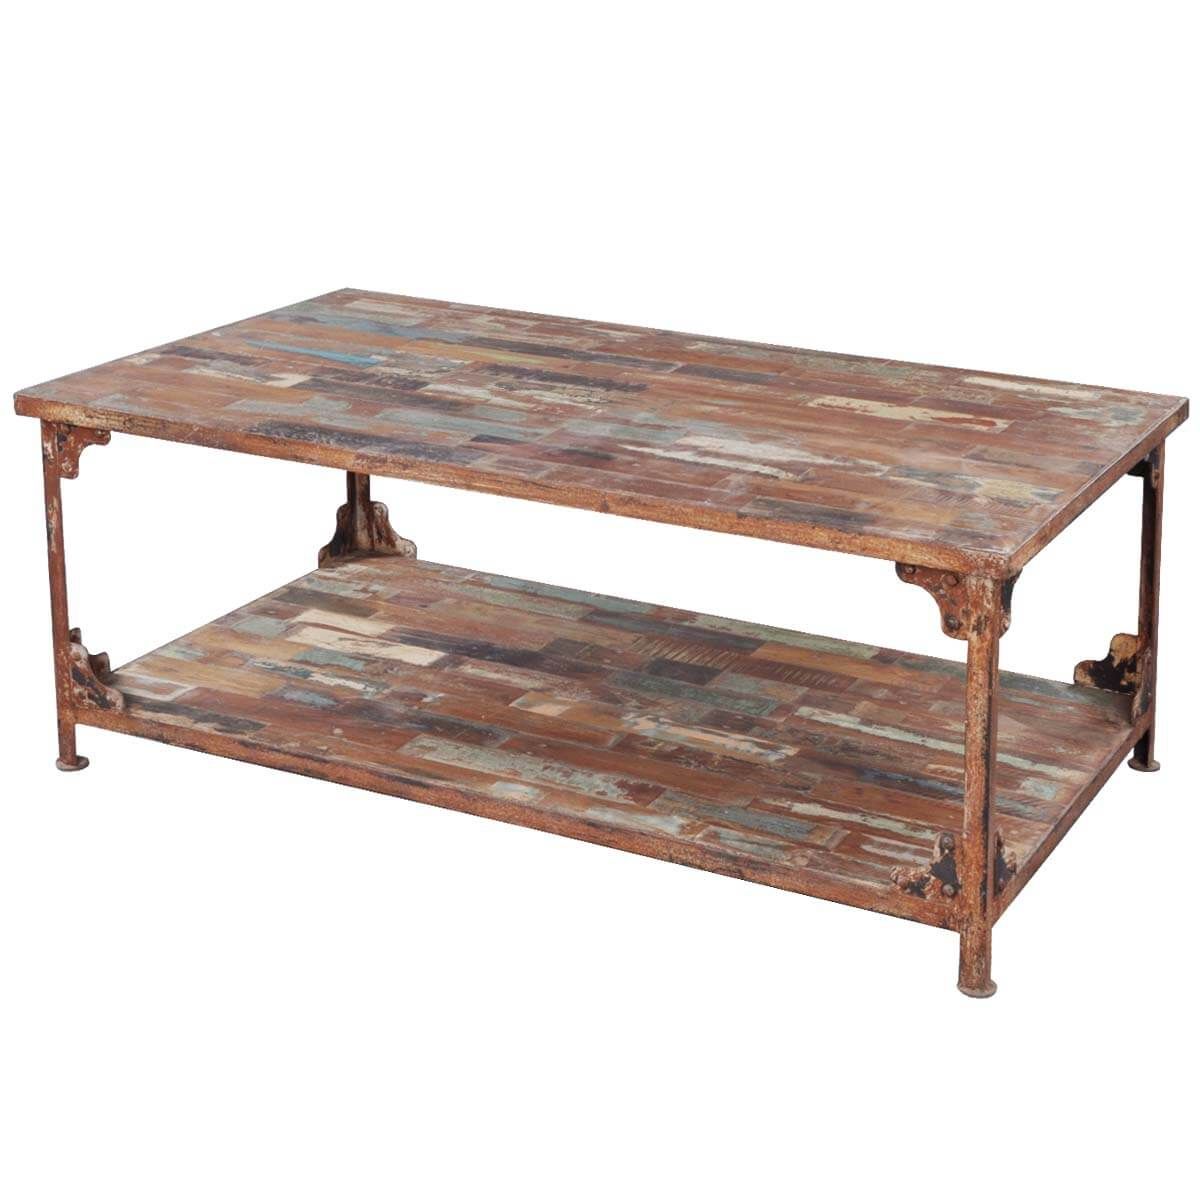 Distressed Reclaimed Wood Wrought Iron Industrial Rustic Coffee Table Regarding Distressed Iron 4 Shelf Desks (View 6 of 15)